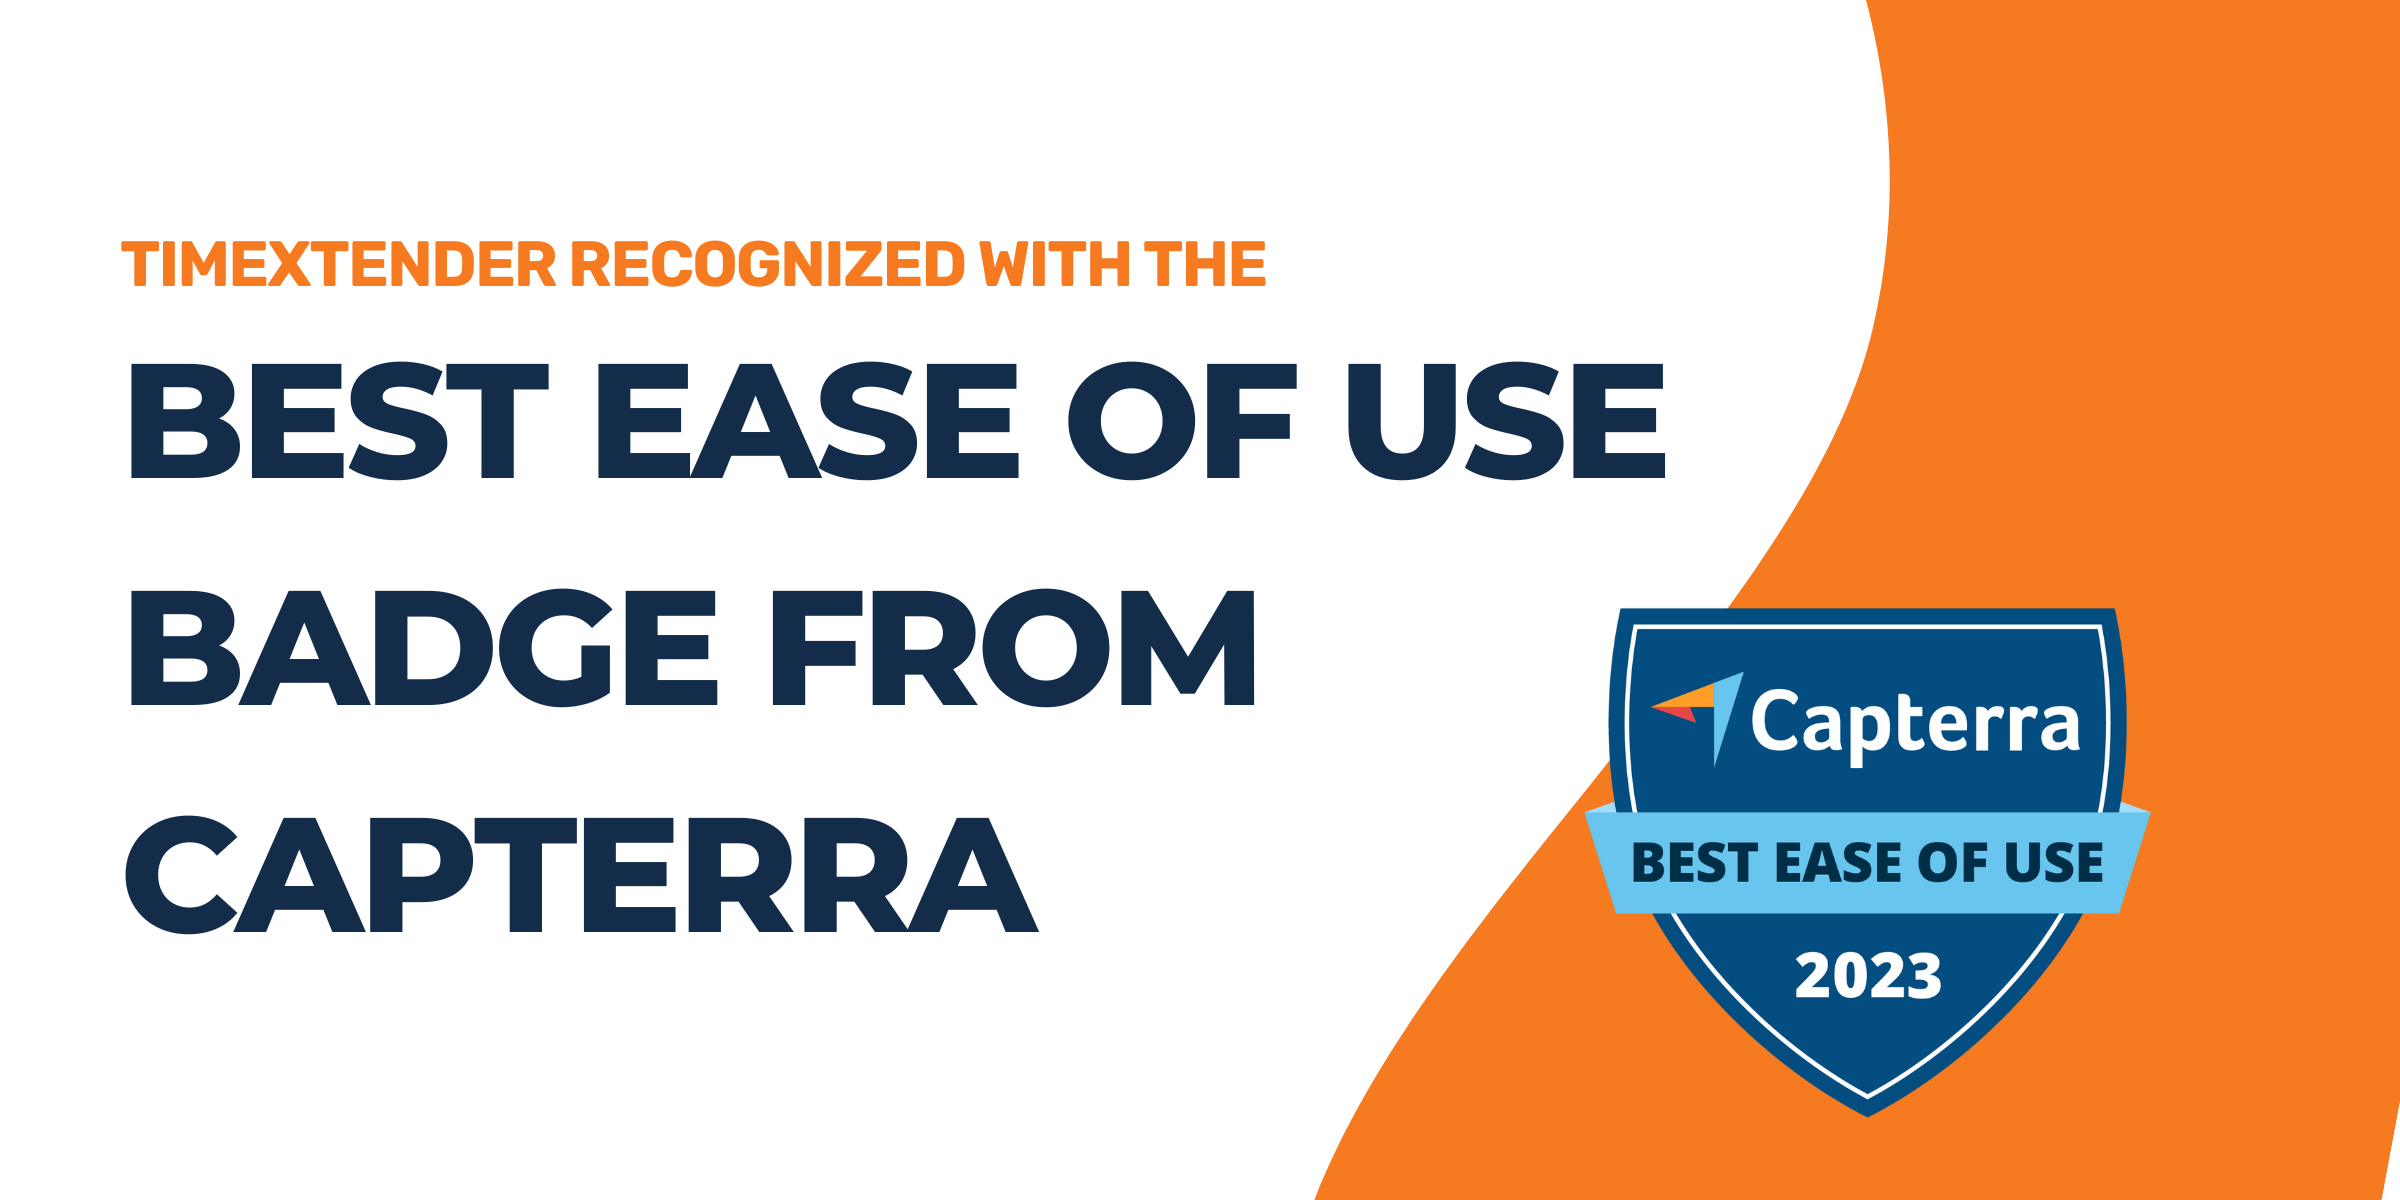 TimeXtender Recognized with Best Ease of Use Badge from Capterra